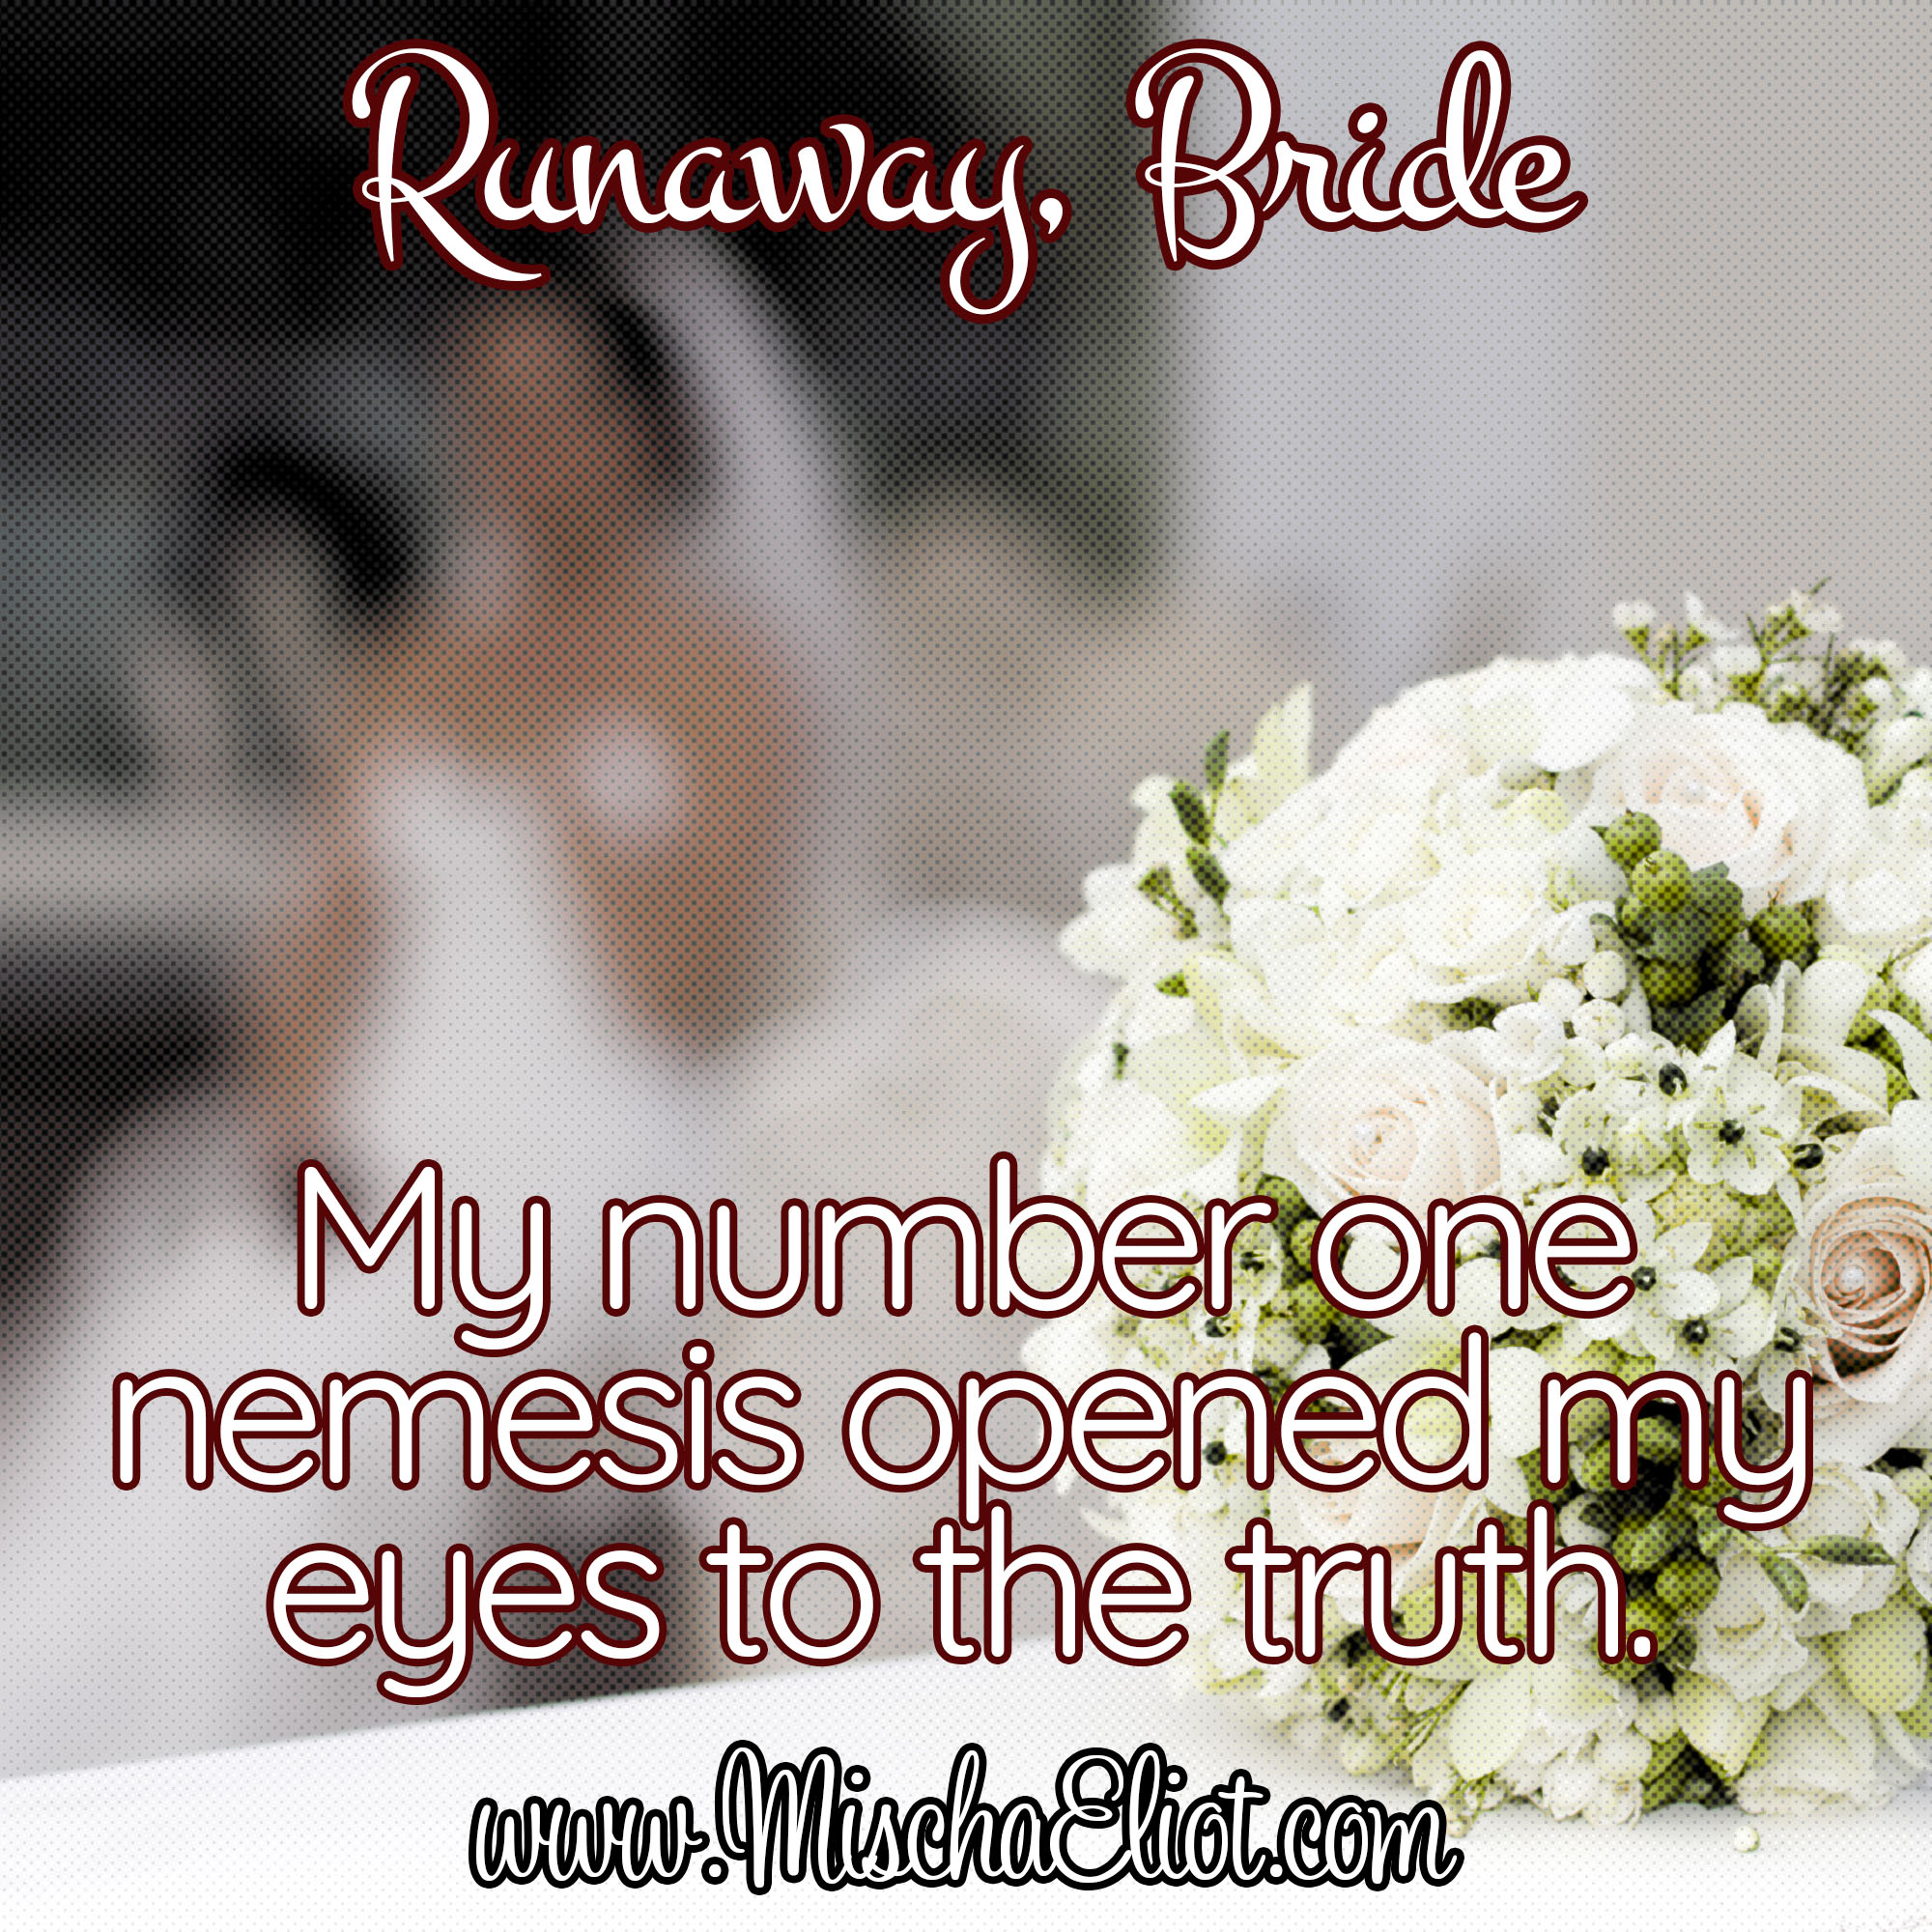 Story Quote Wicked Wednesday Runaway Bride